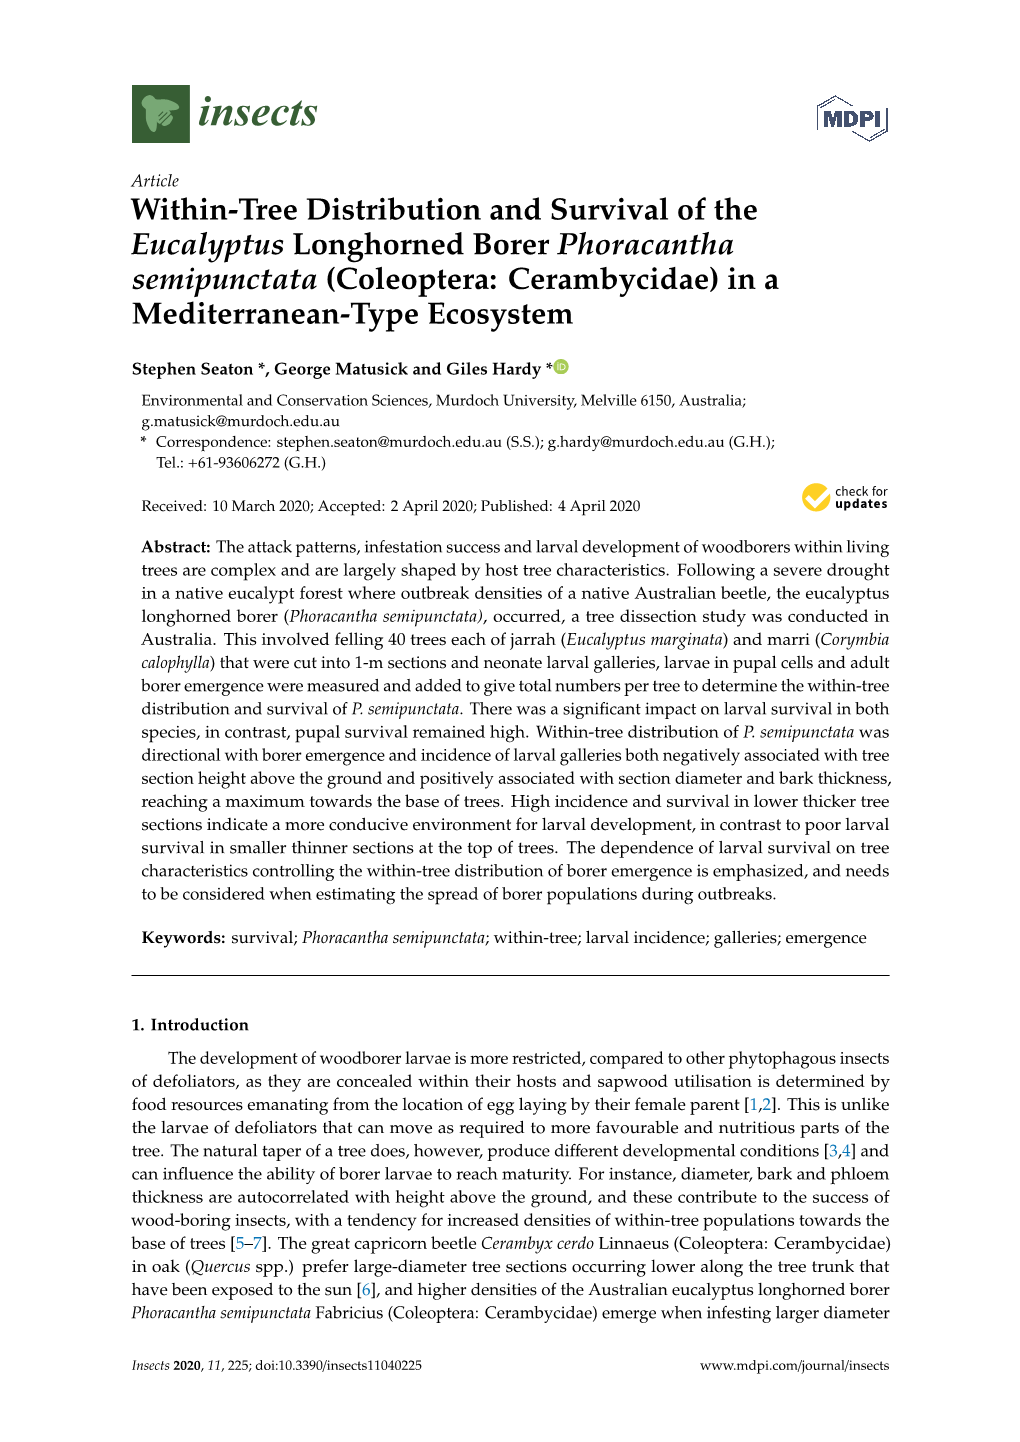 Within-Tree Distribution and Survival of the Eucalyptus Longhorned Borer Phoracantha Semipunctata (Coleoptera: Cerambycidae) in a Mediterranean-Type Ecosystem